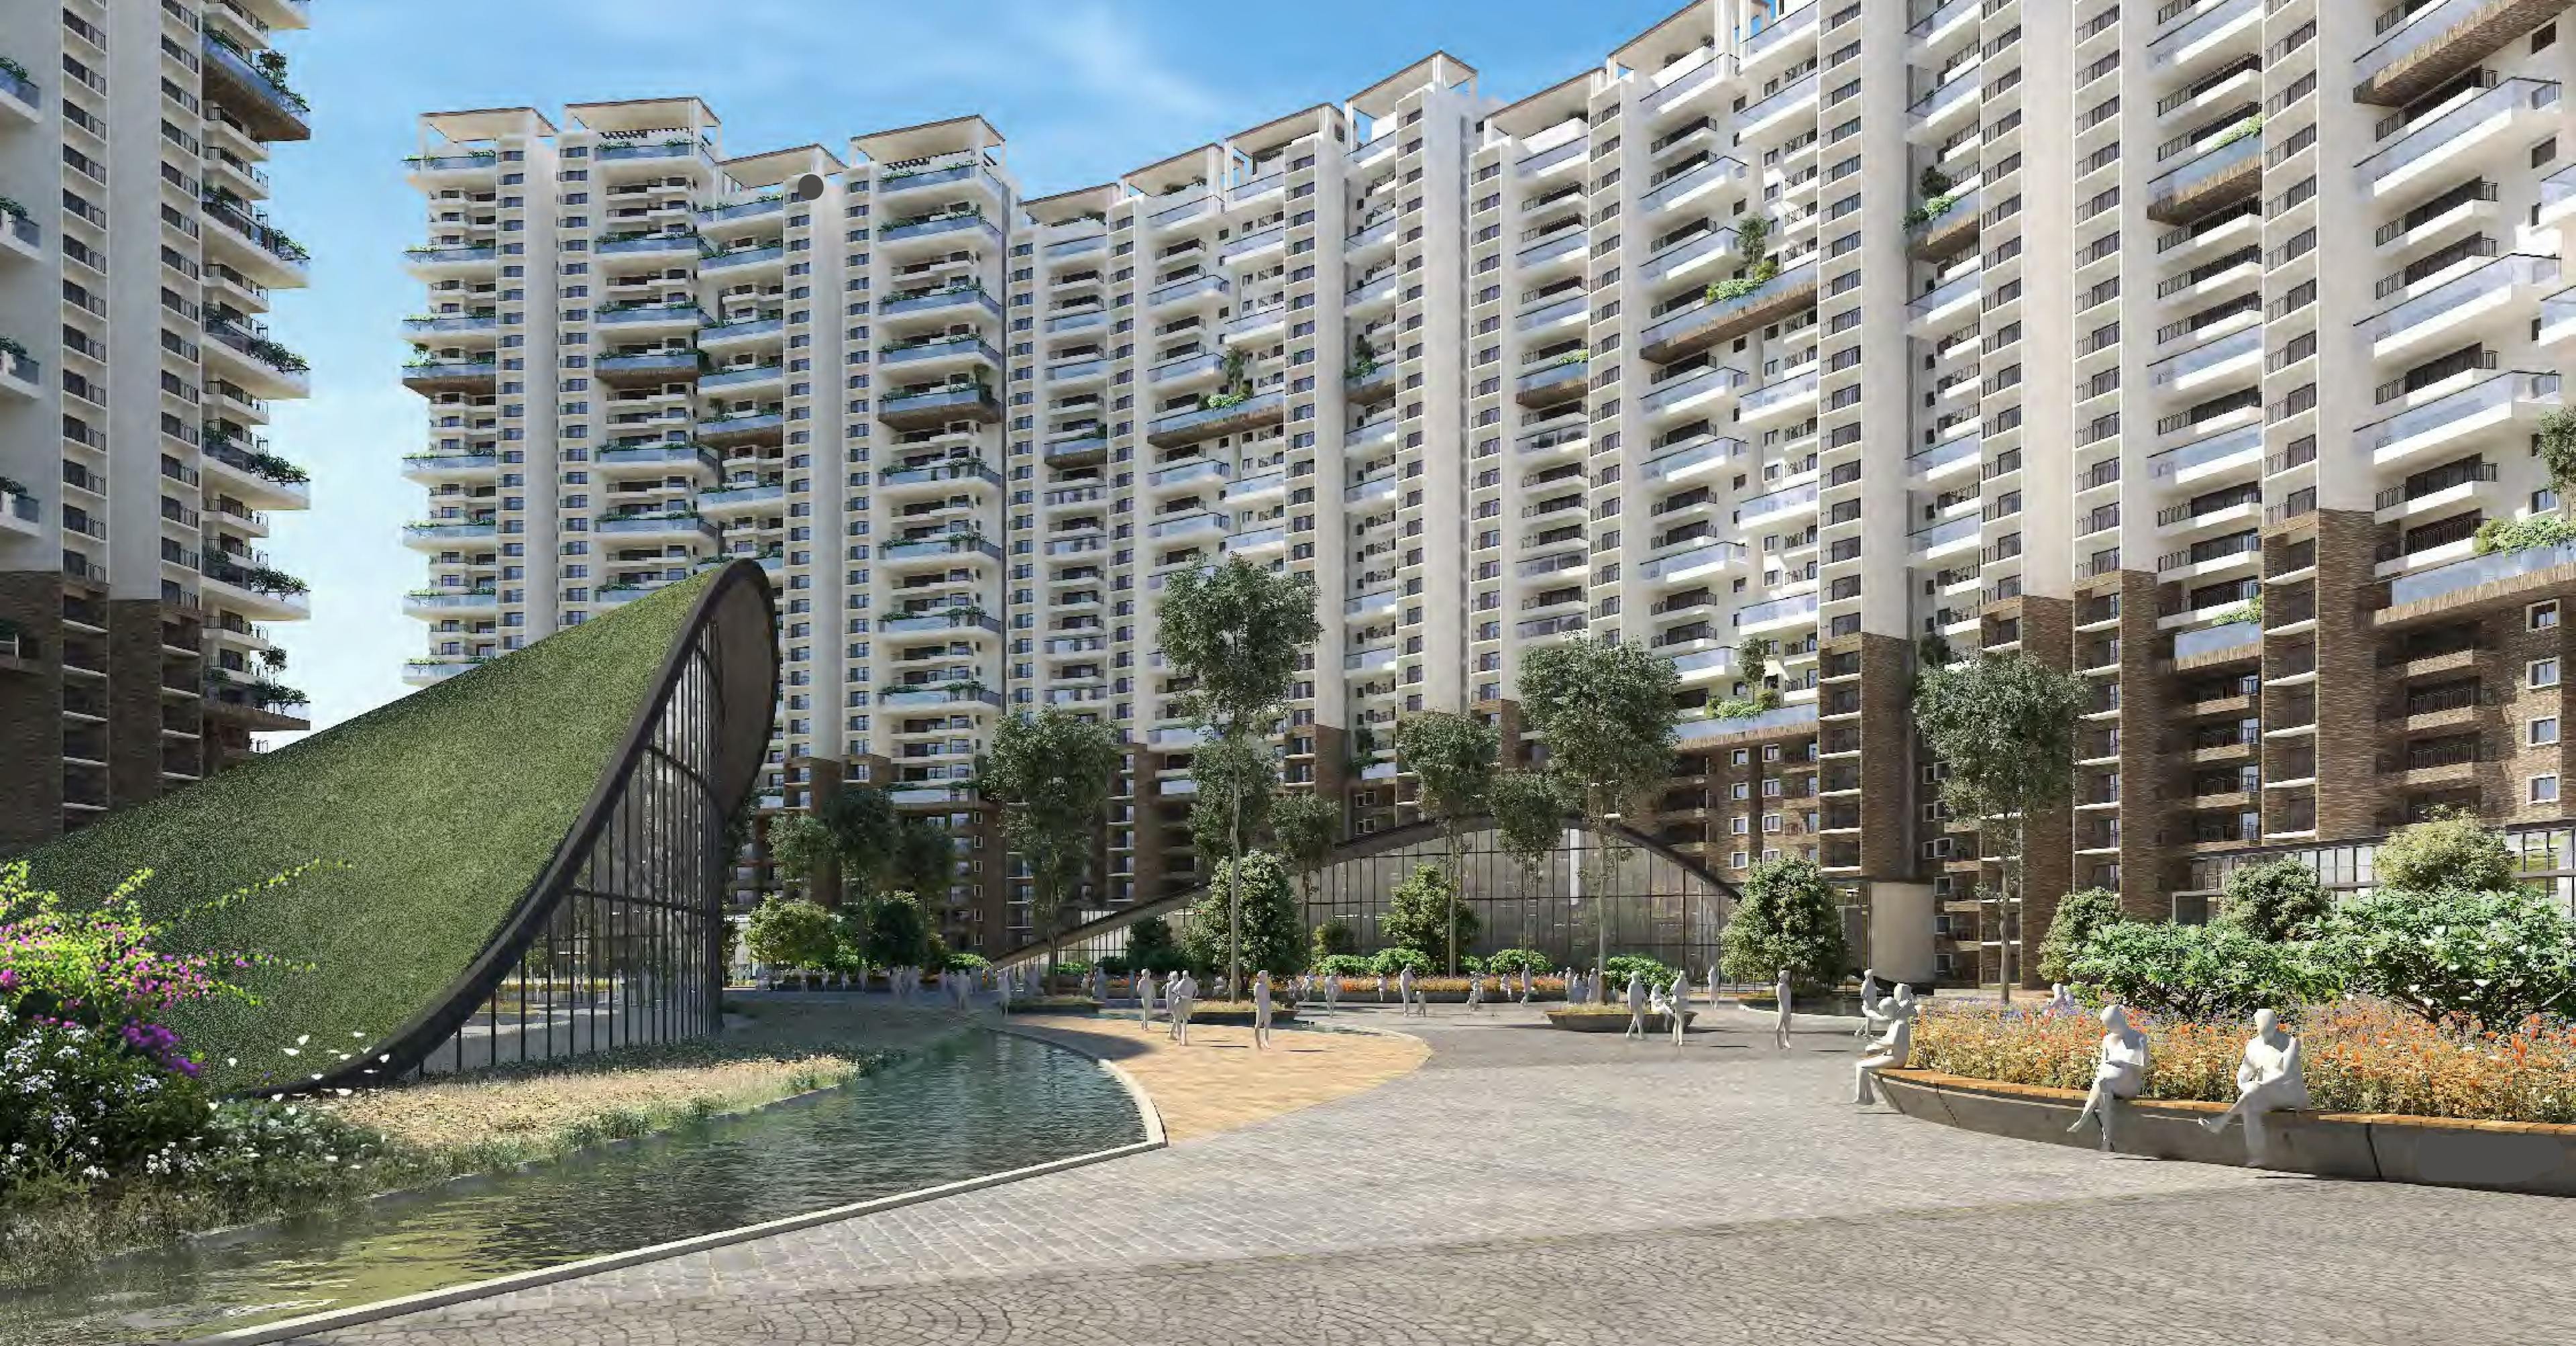 Property Image for Prestige Whitefield